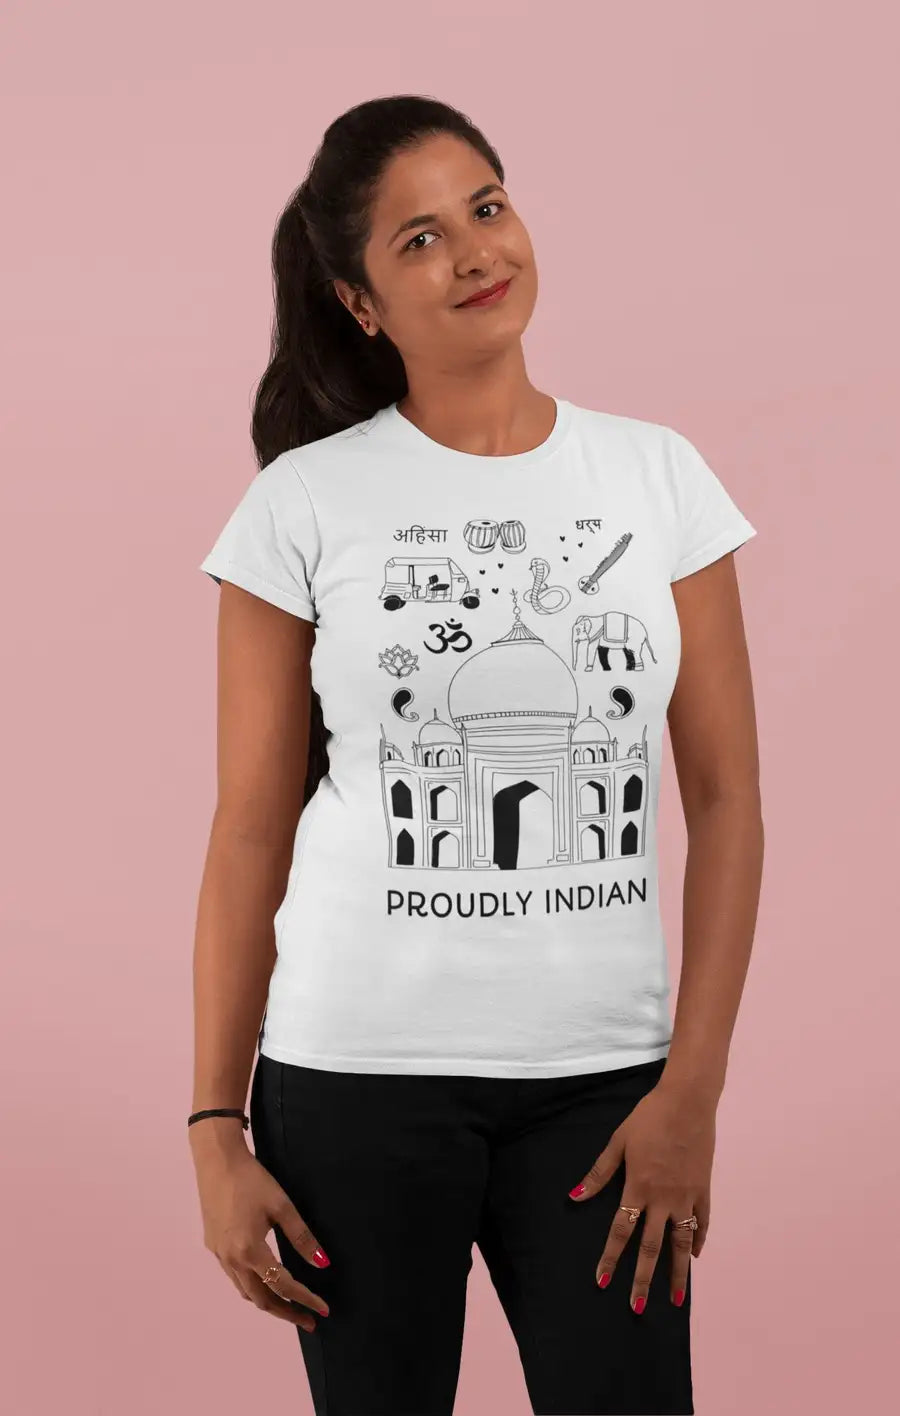 Proudly Indian Limited Edition Unisex T-Shirt | Premium Design | Catch My Drift India - Catch My Drift India Clothing clothing, indian, made in india, shirt, t shirt, trending, tshirt, white